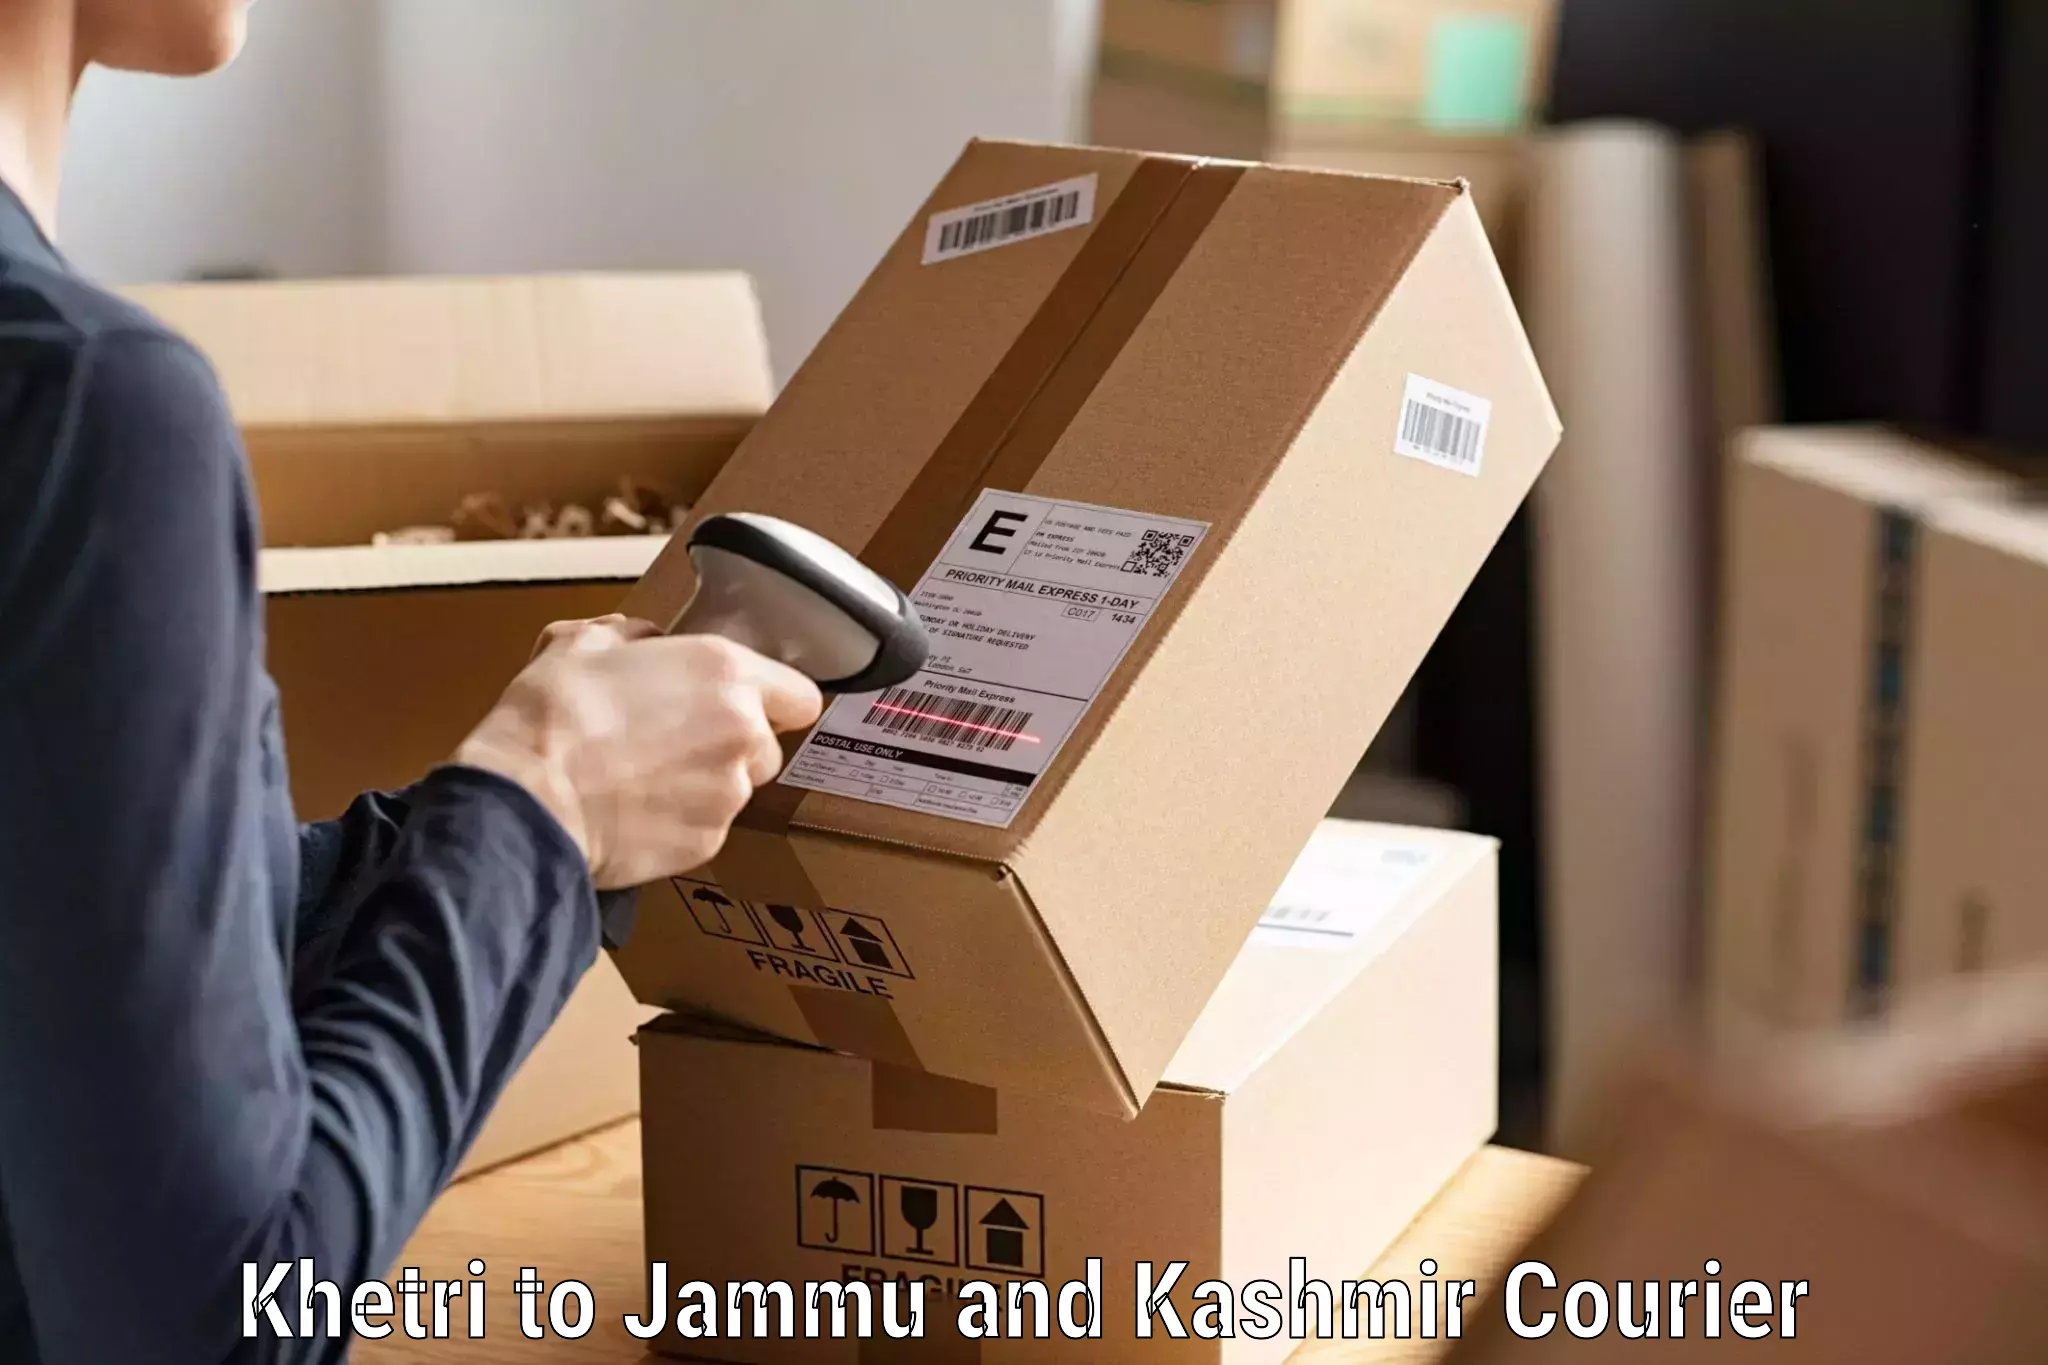 Express delivery capabilities in Khetri to Kathua